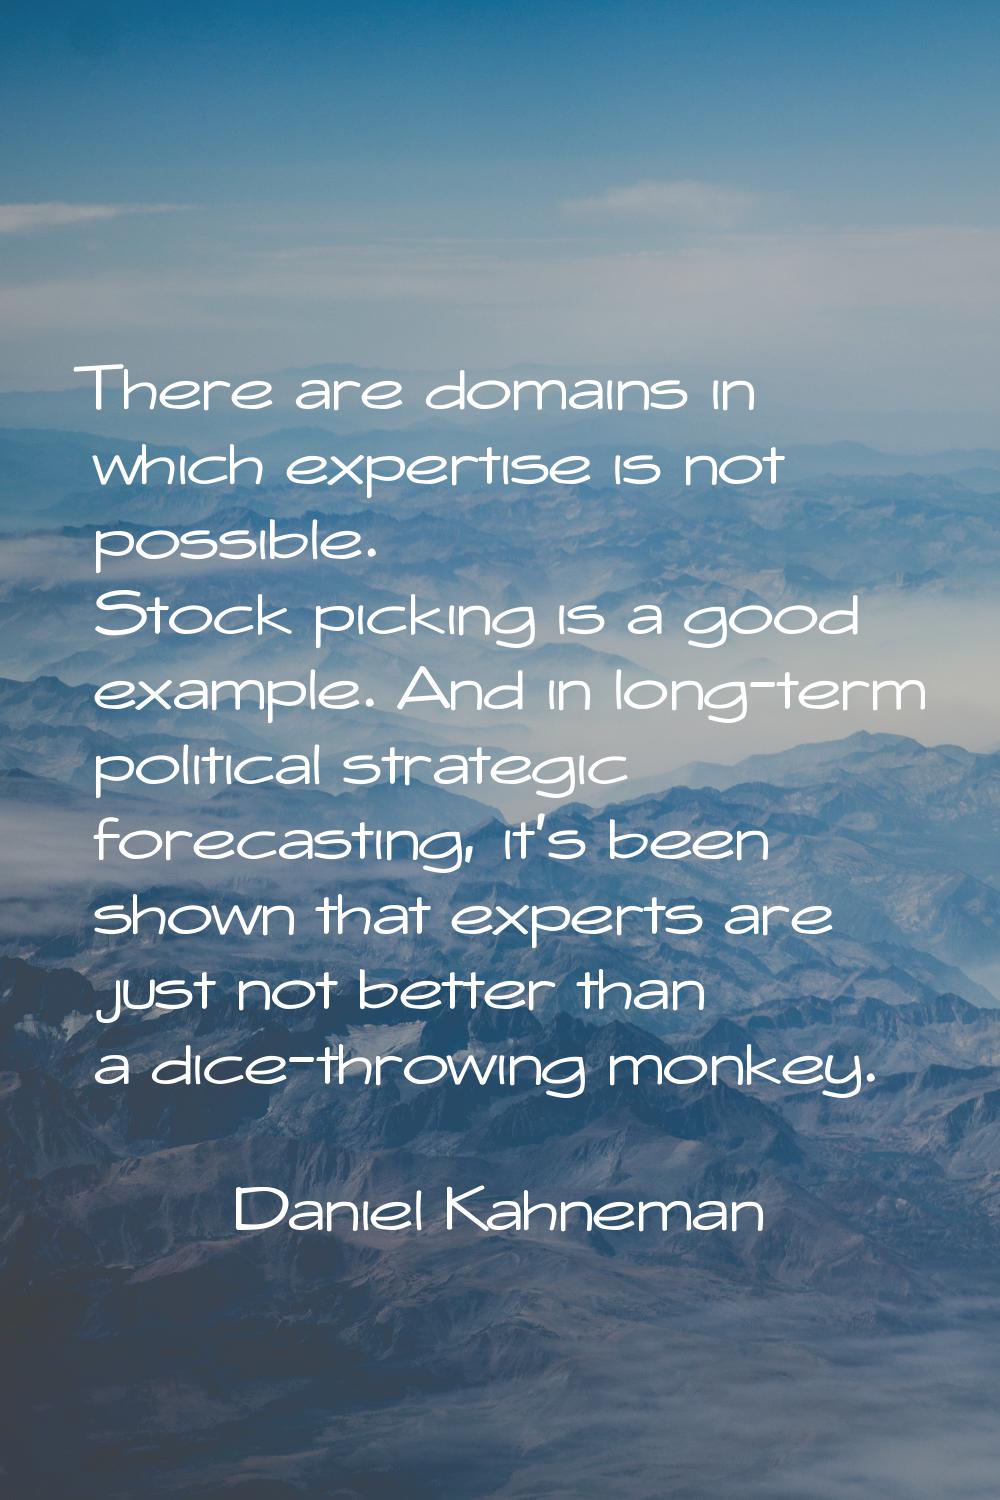 There are domains in which expertise is not possible. Stock picking is a good example. And in long-